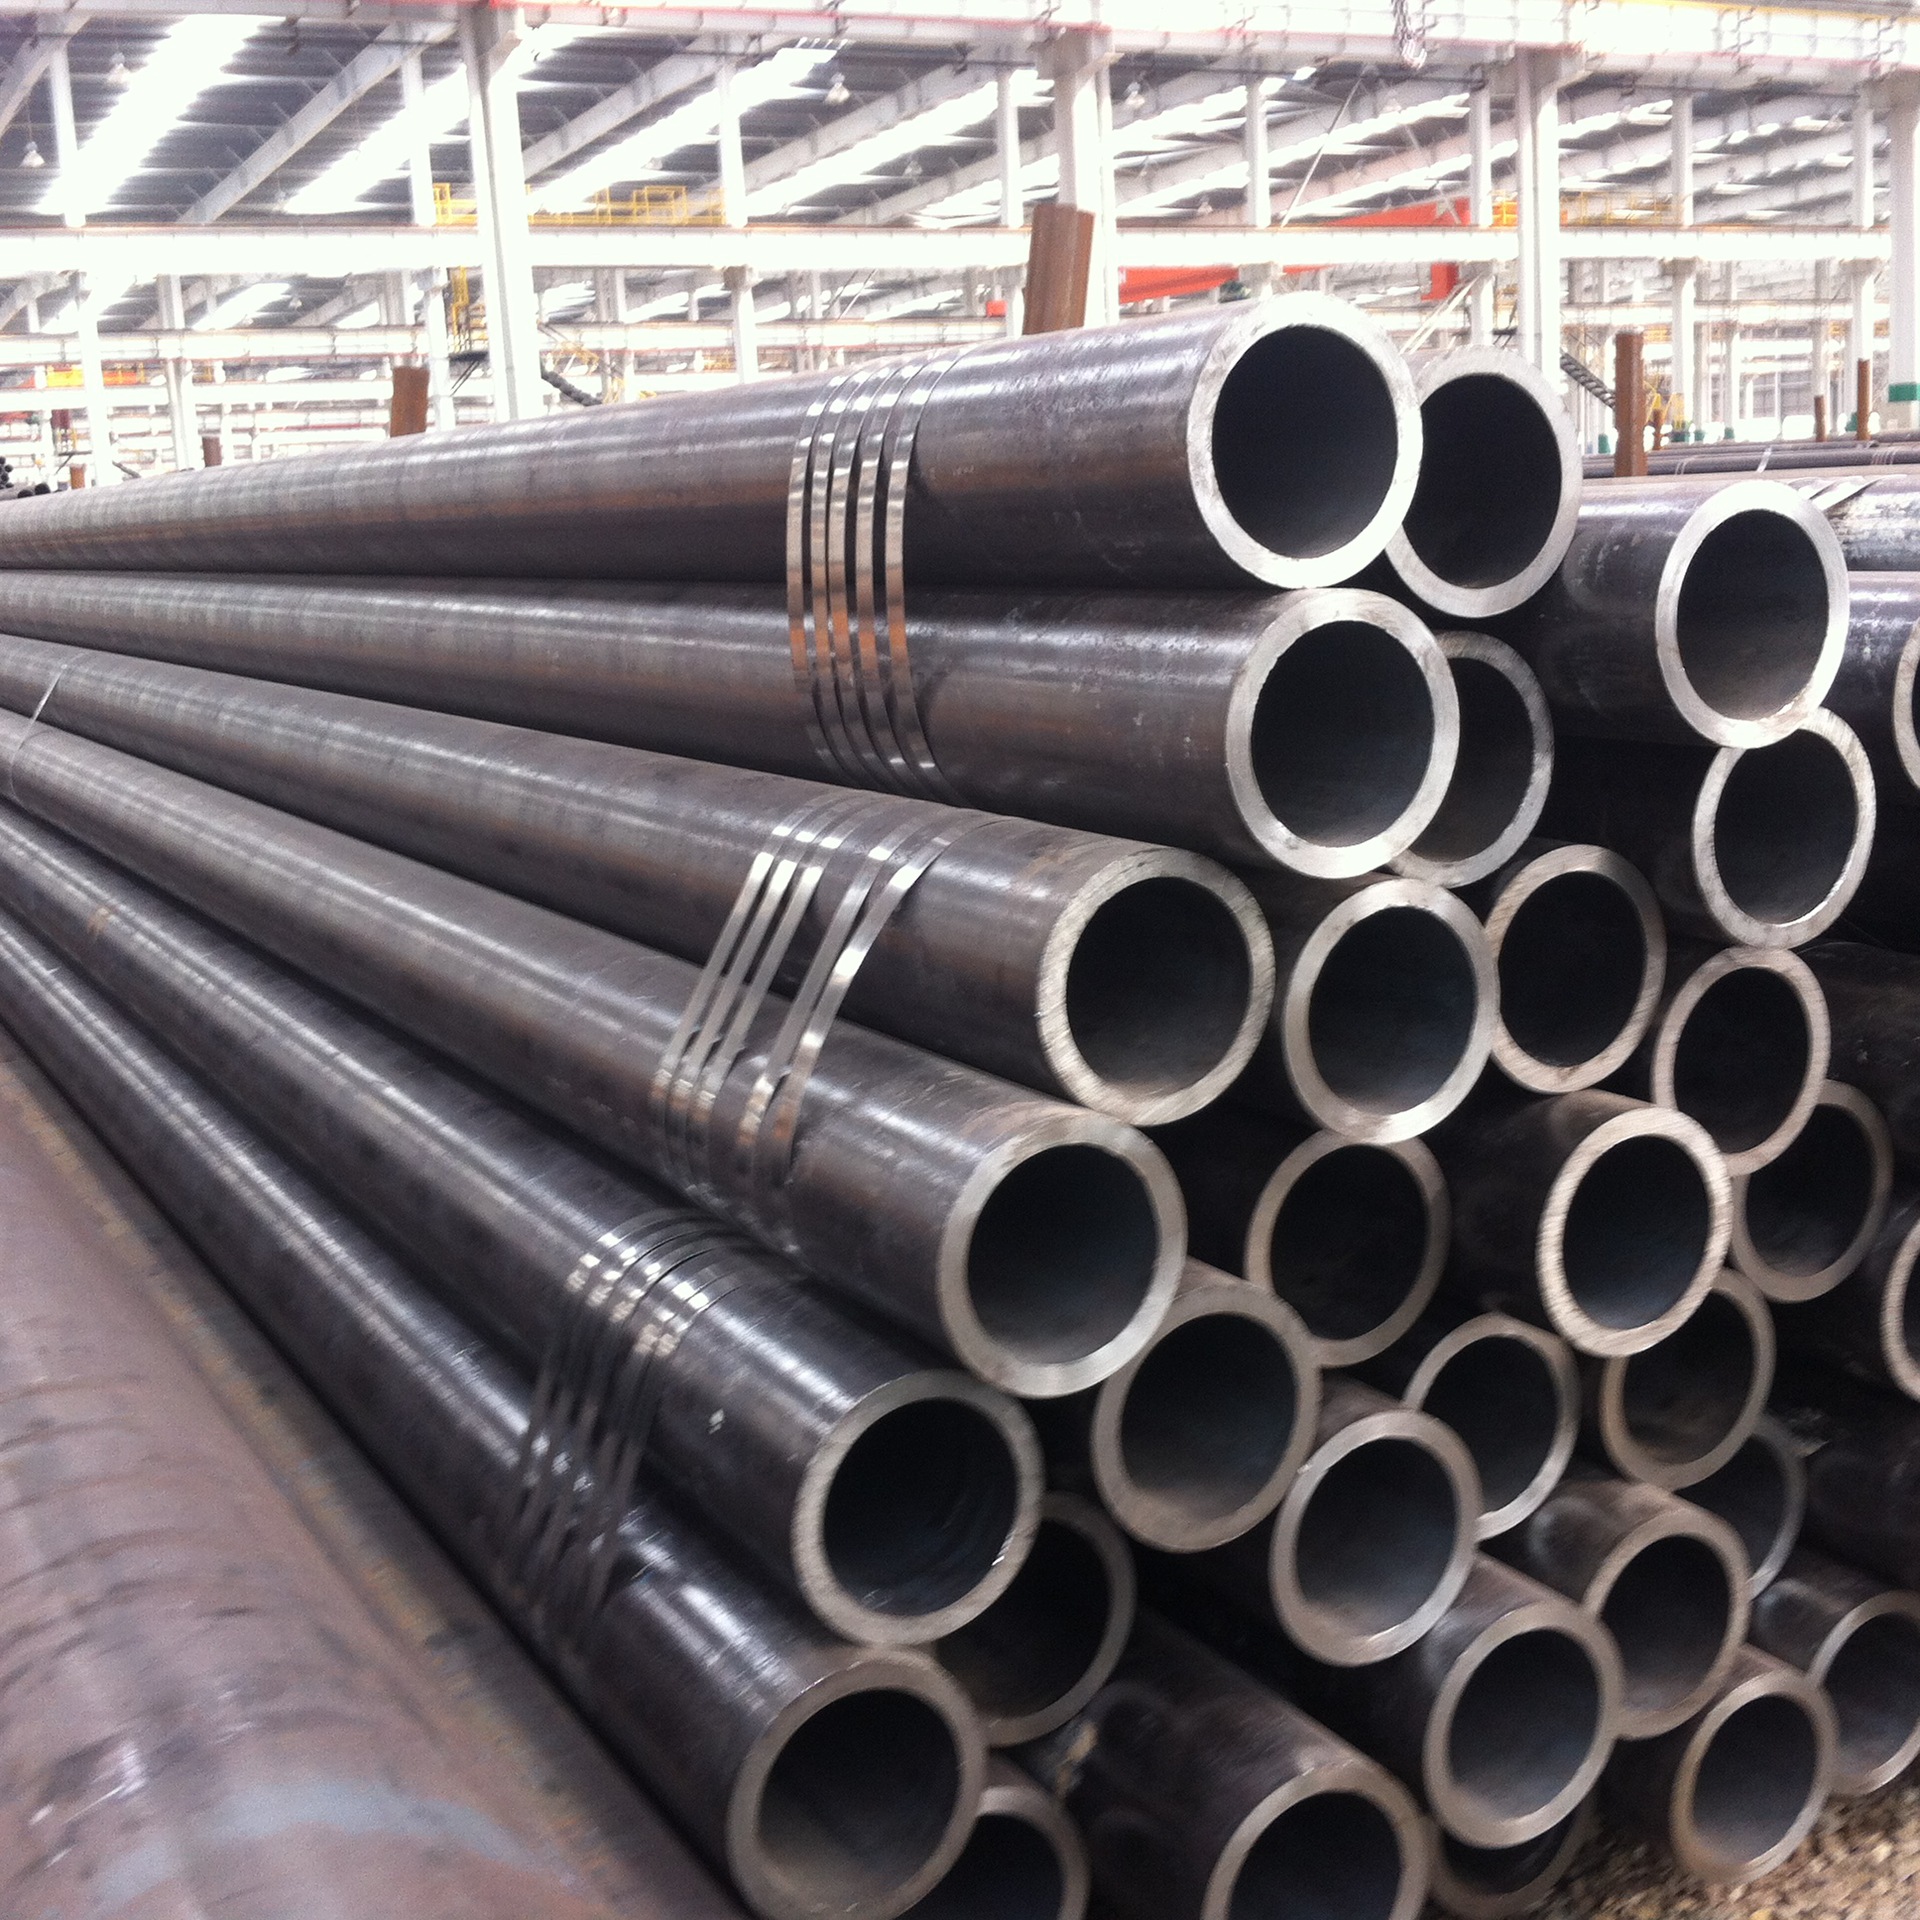 Cheap PriceList for Baosteel Q345b Hot Rolled Seamless Pipe - Spot price of 42CrMo4 a369fp12 a335p5 alloy steel pipe – Weichuan